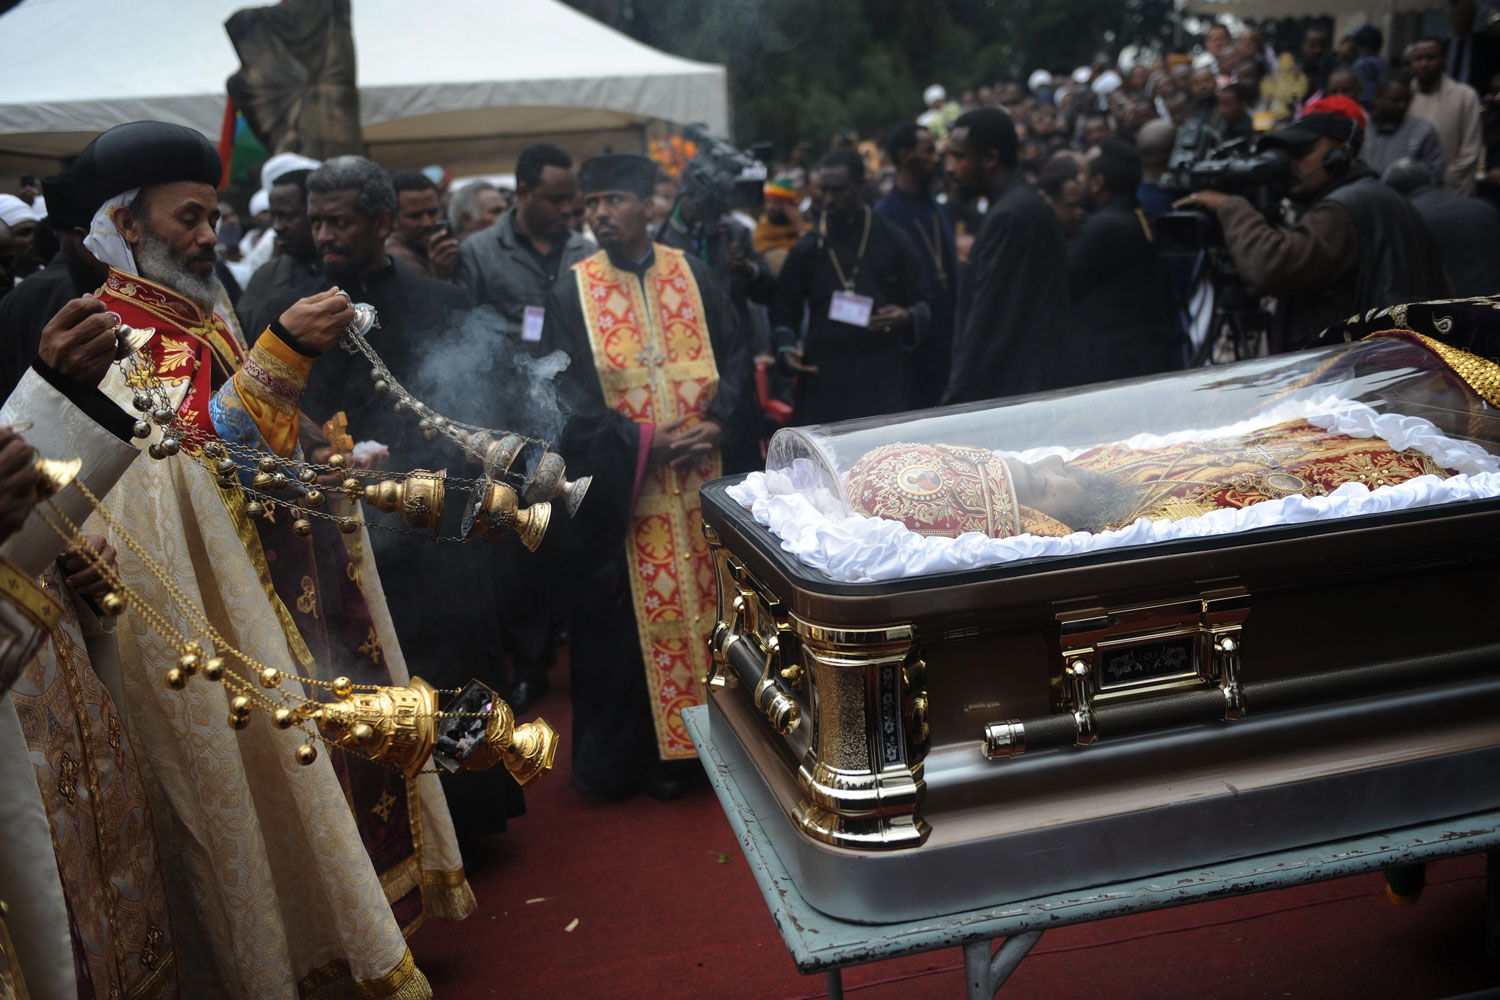 Aug. 23, 2012. Orthodox priests conduct a religious ceremony  next to the casket bearing the remains of Patriarch of the Ethiopian Orthodox Church, Abune Paulos, during his funeral at the St Selassie Orthodox church in Addis Ababa.